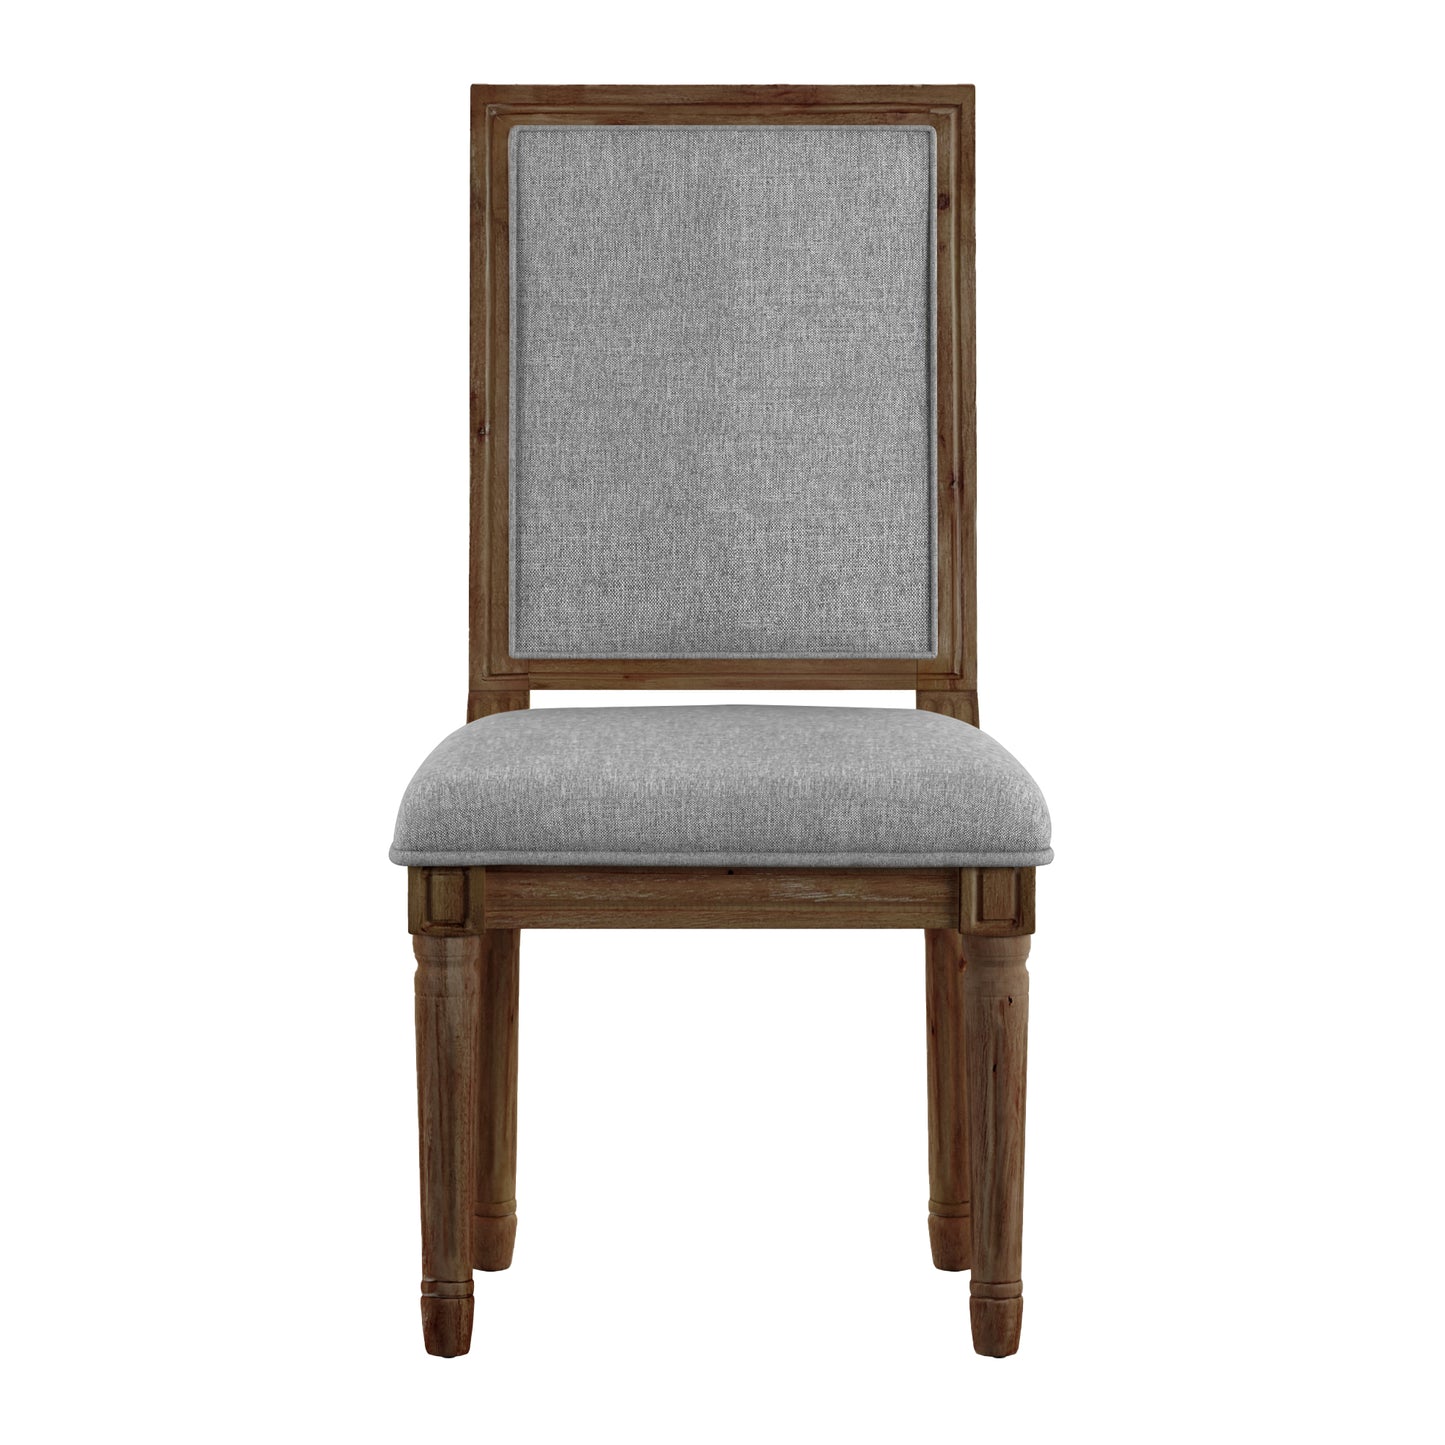 Rectangular Linen and Wood Dining Chairs (Set of 2) - Gray Linen, Brown Finish